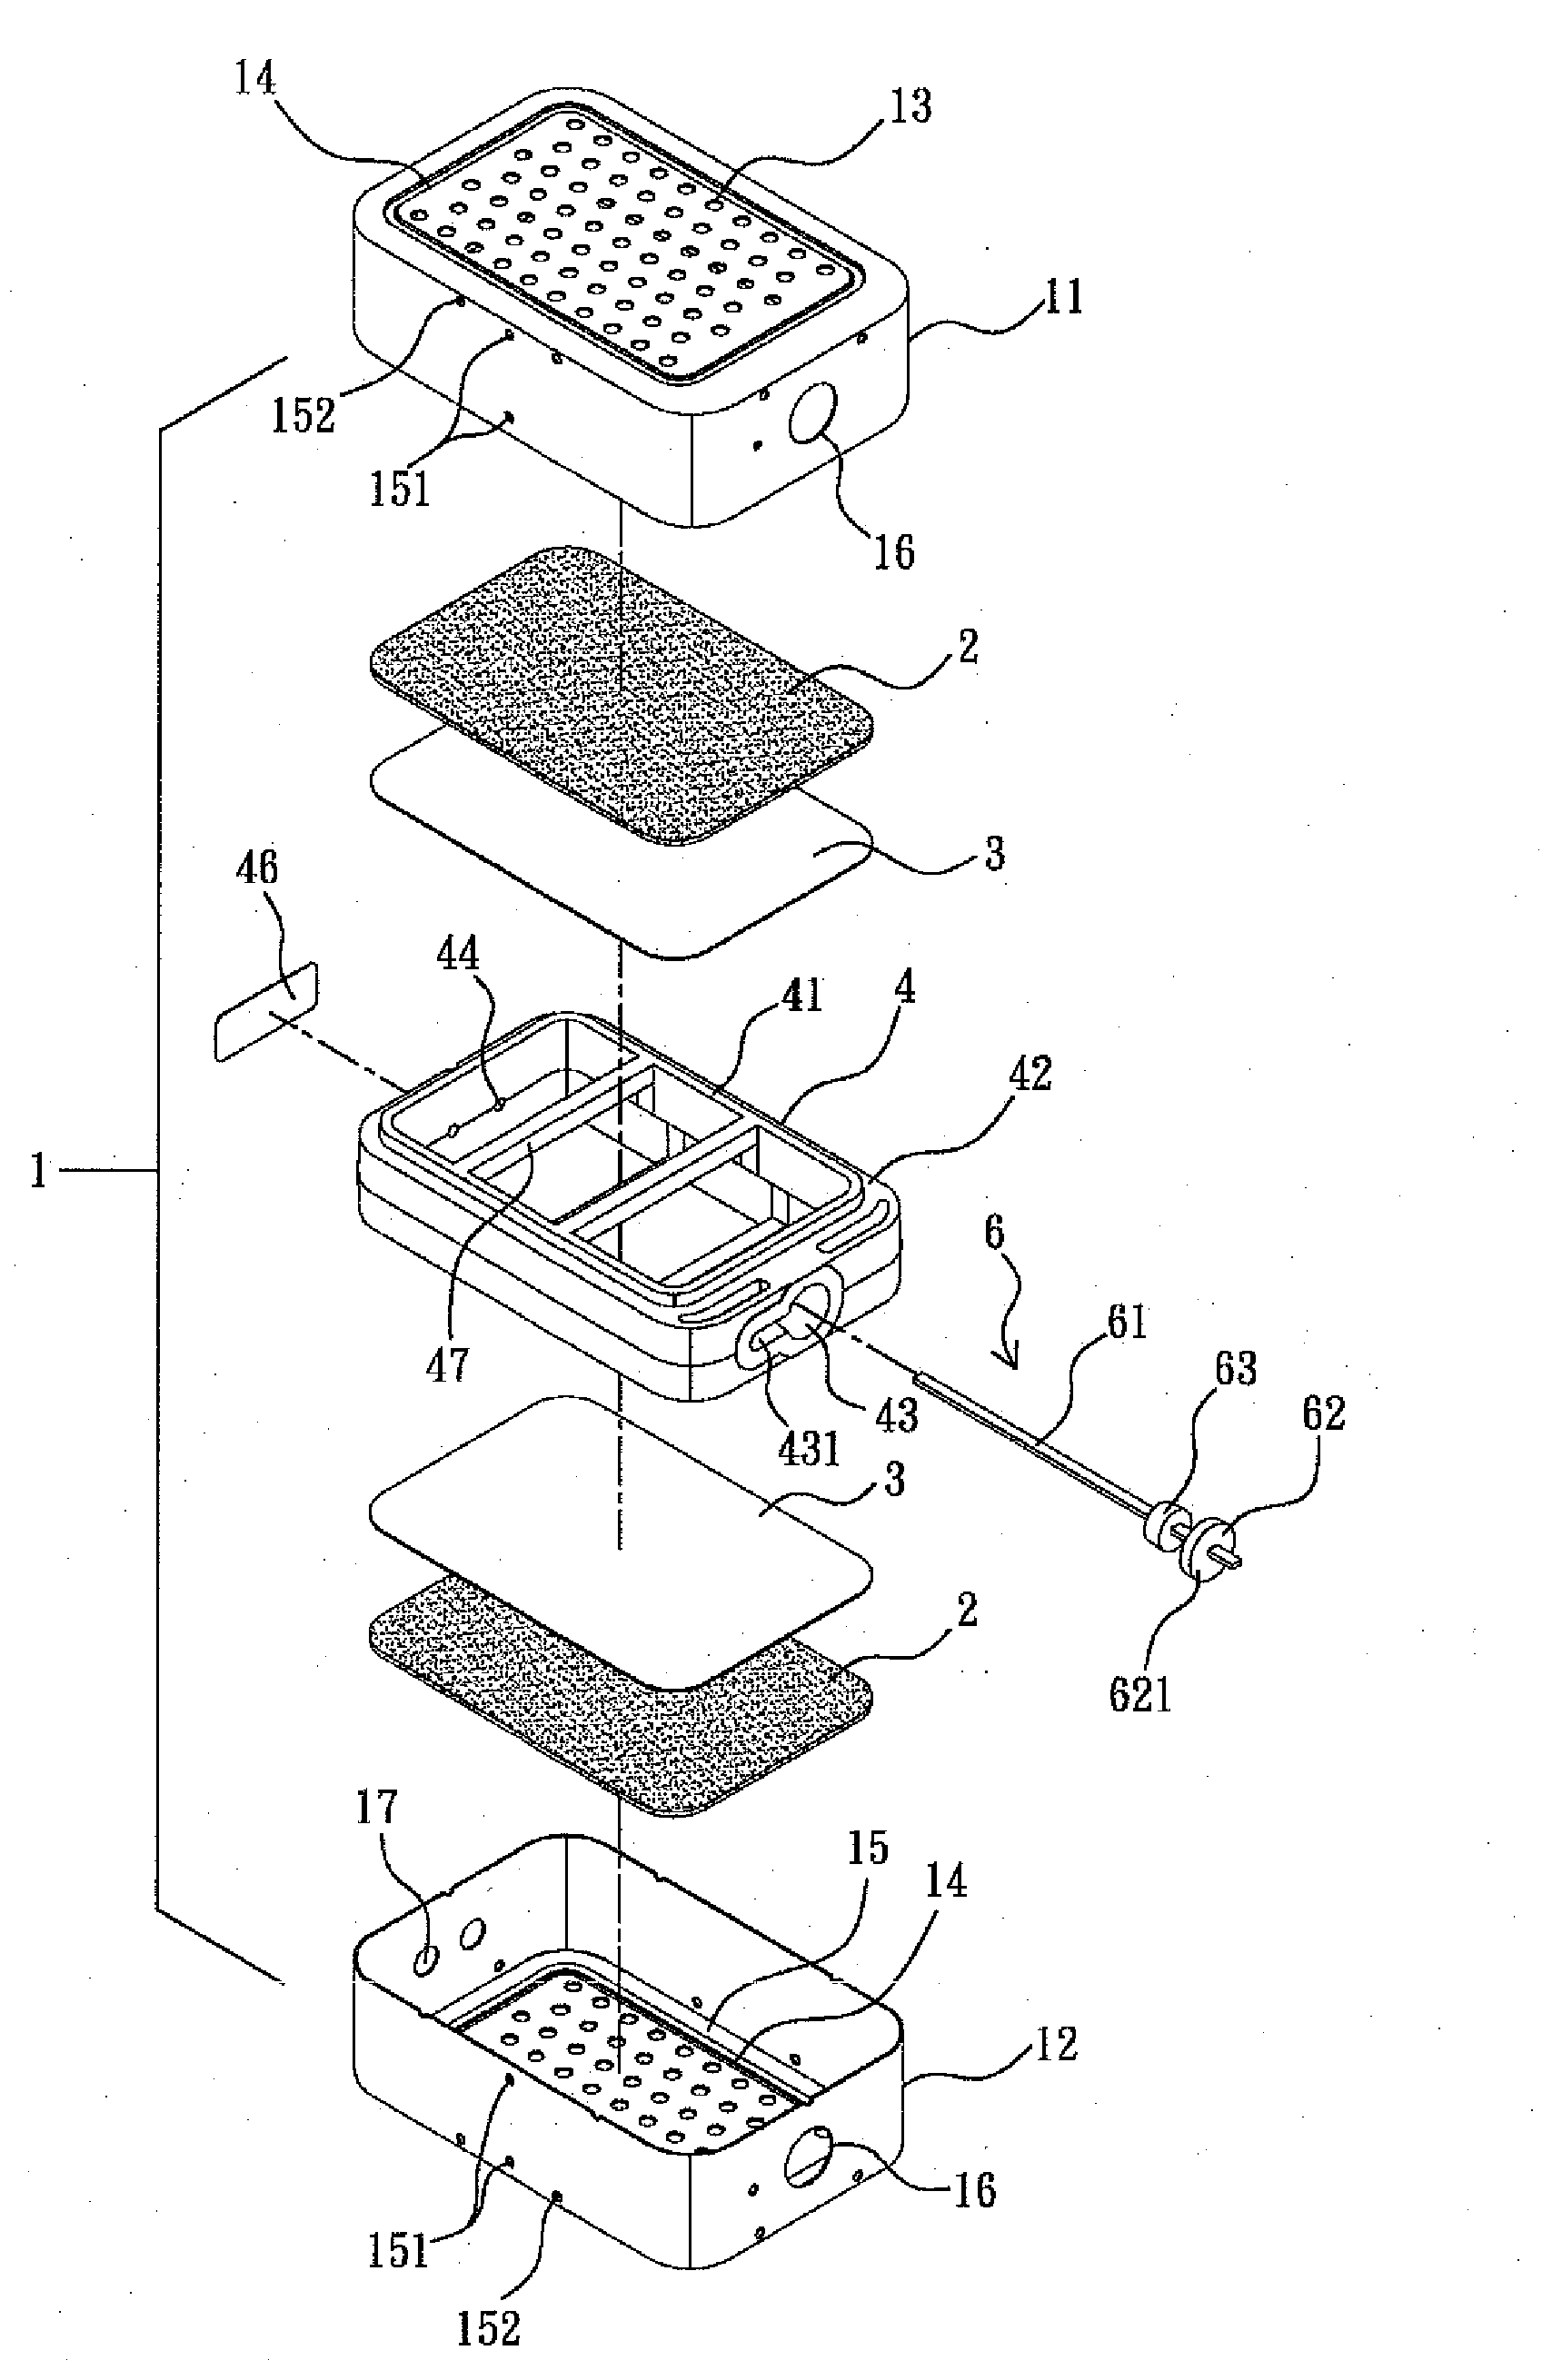 Packaging structure of low-pressure molded fuel cell